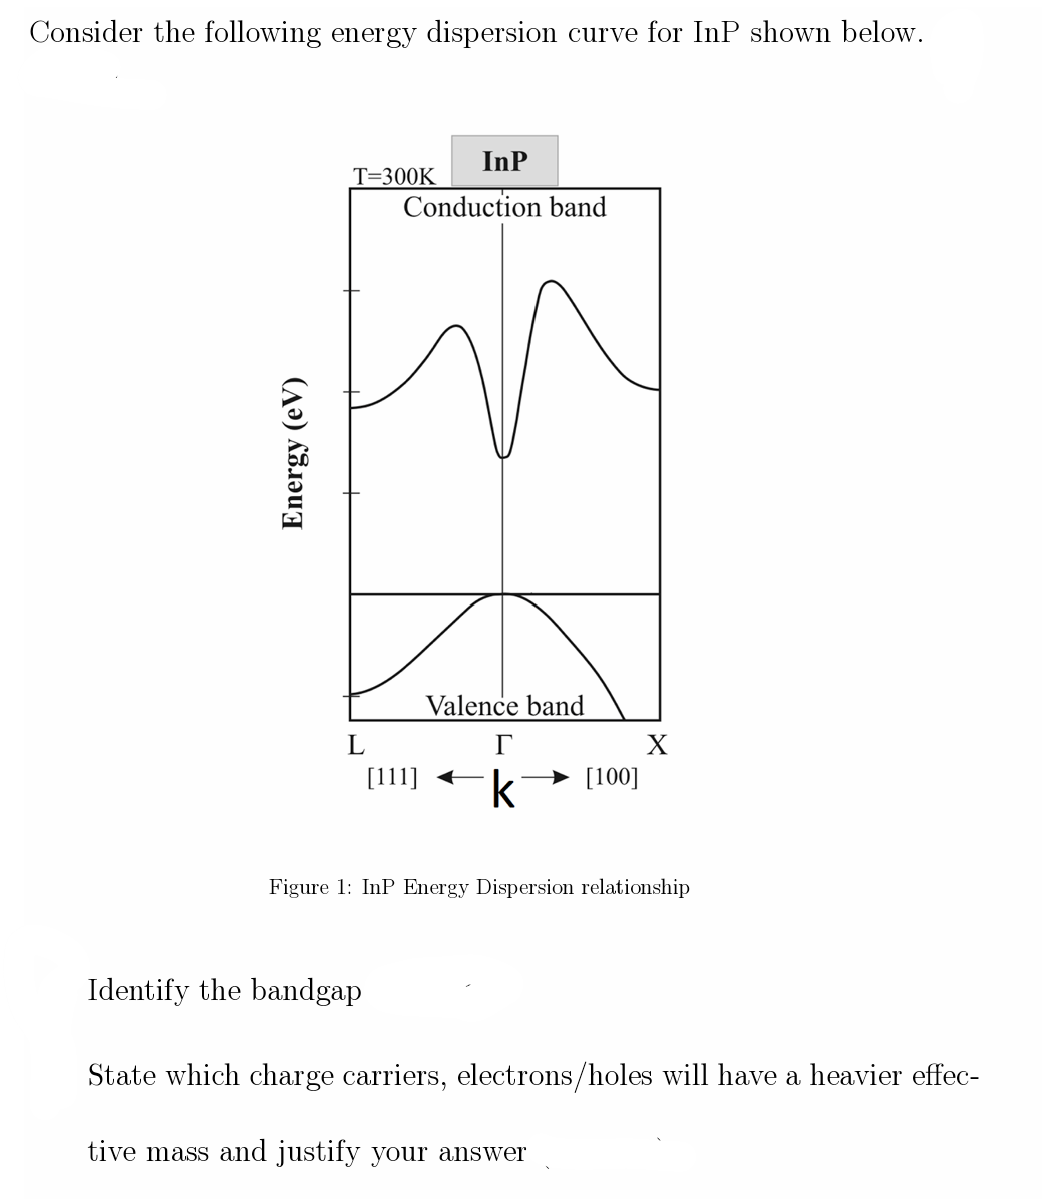 Consider the following energy dispersion curve for InP shown below.
Energy (eV)
T=300K
InP
Conduction band
L
Valence band
Г
[111]
k
[100]
Figure 1: InP Energy Dispersion relationship
Identify the bandgap
State which charge carriers, electrons/holes will have a heavier effec-
tive mass and justify your answer